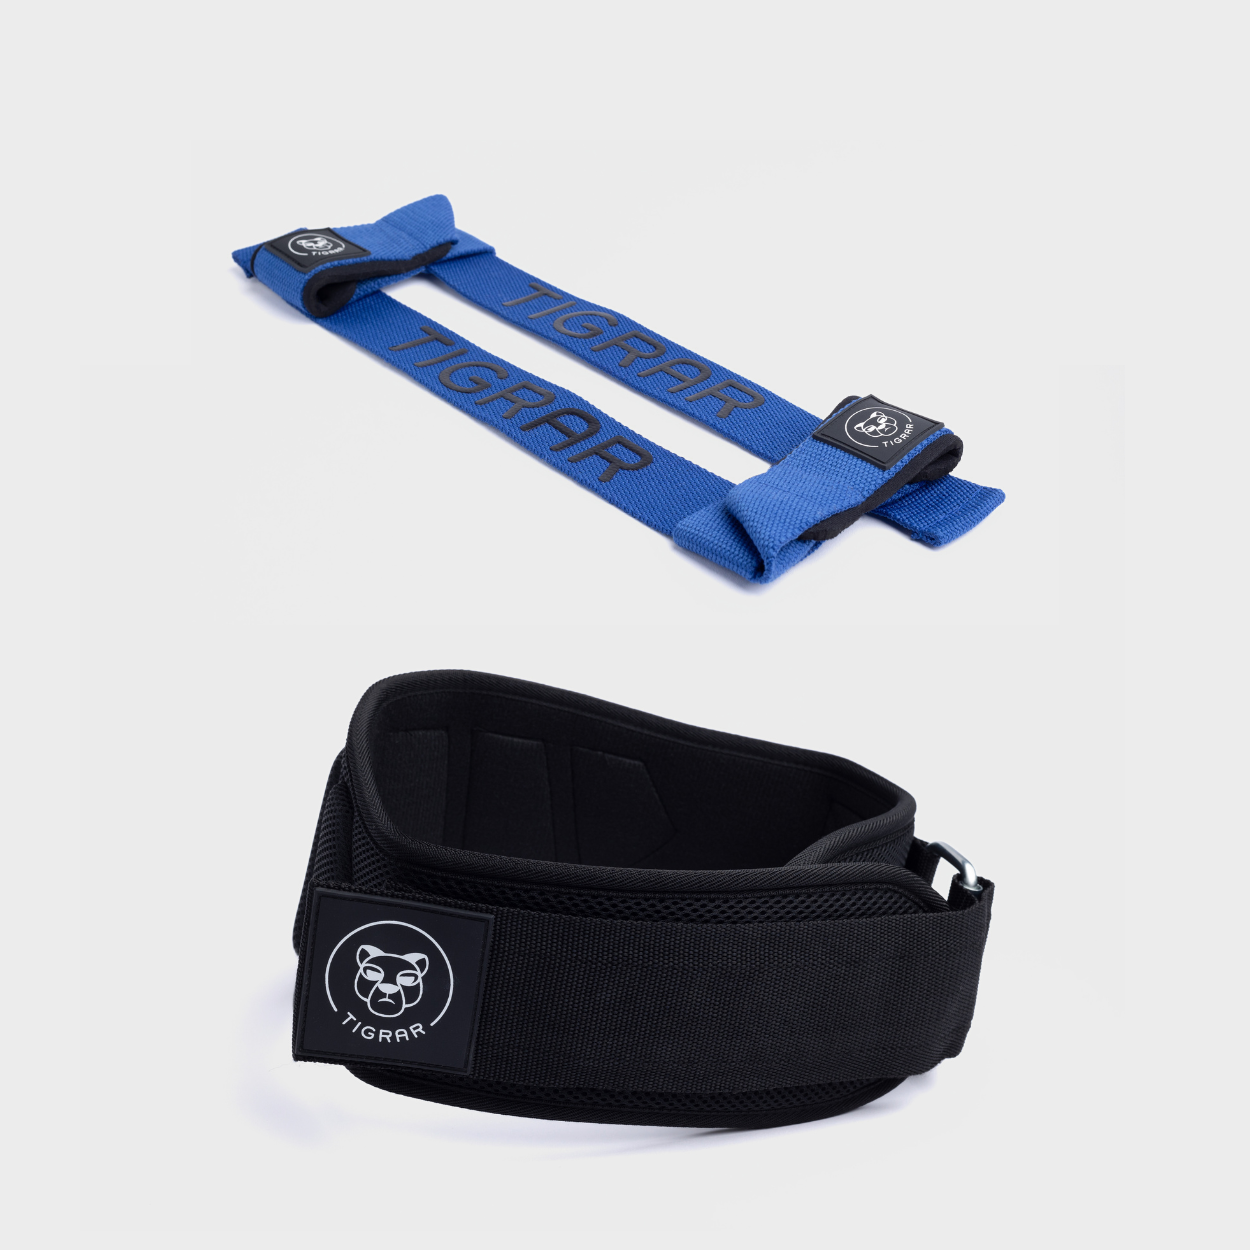 Lifting belt and straps